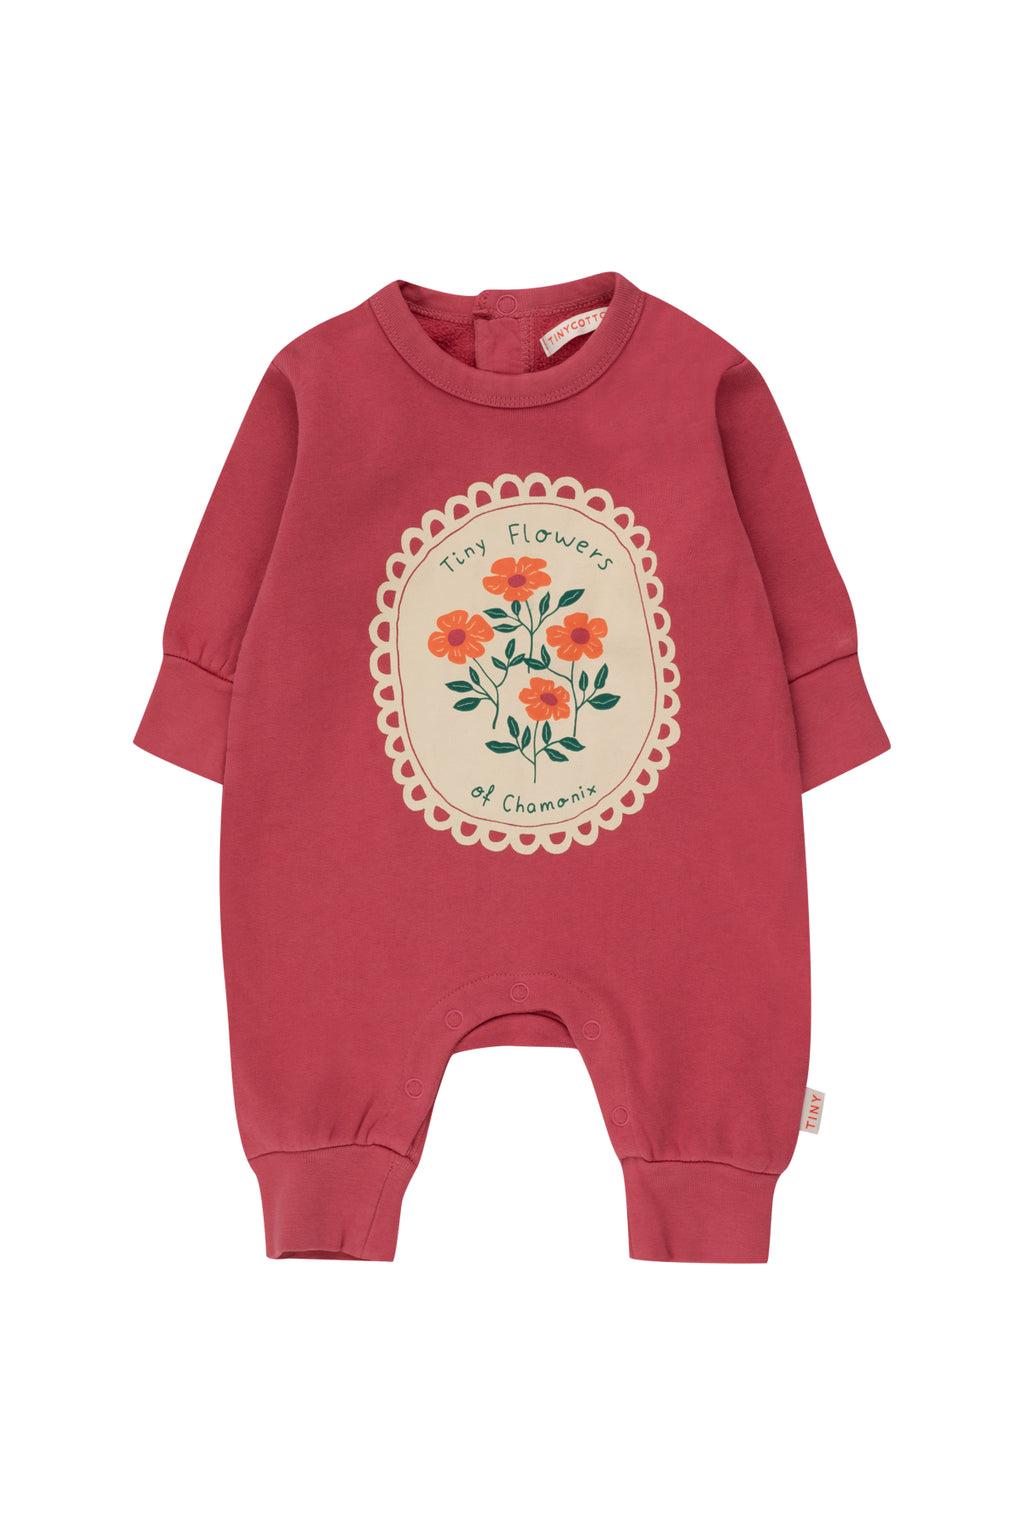 Tiny Cottons Tiny Flowers One Piece - Berry